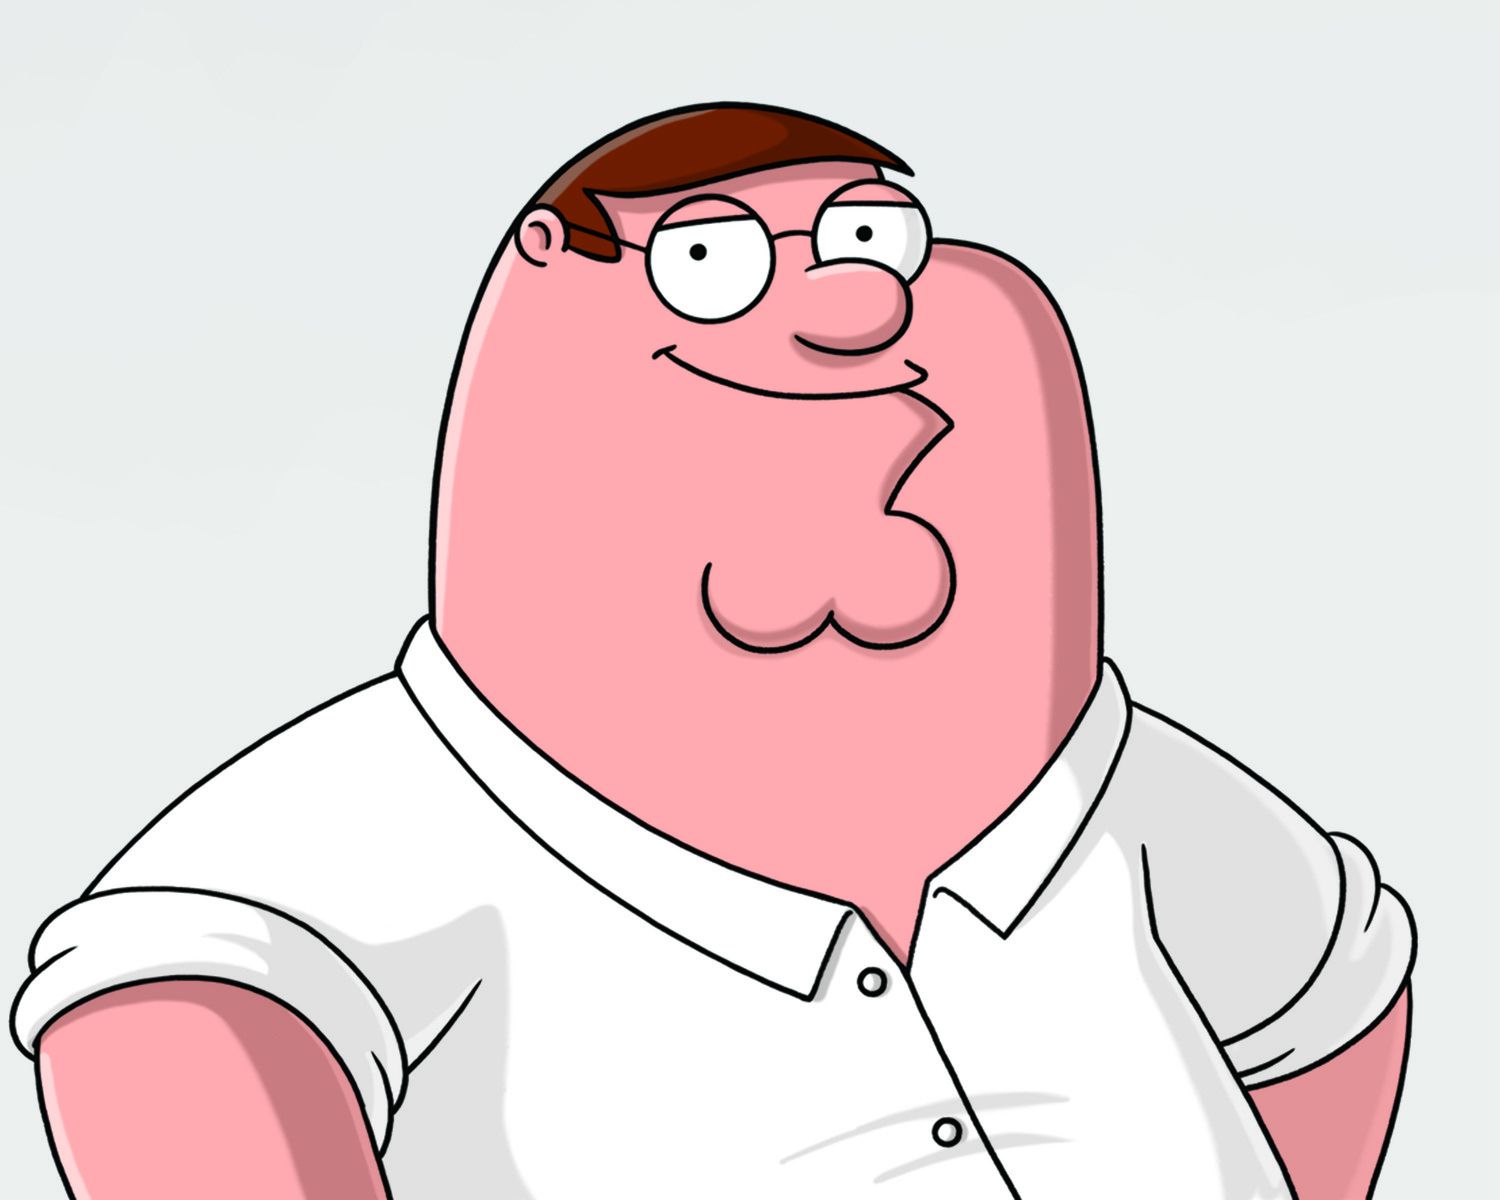 dino sor recommends Pictures Of Peter Griffin From Family Guy